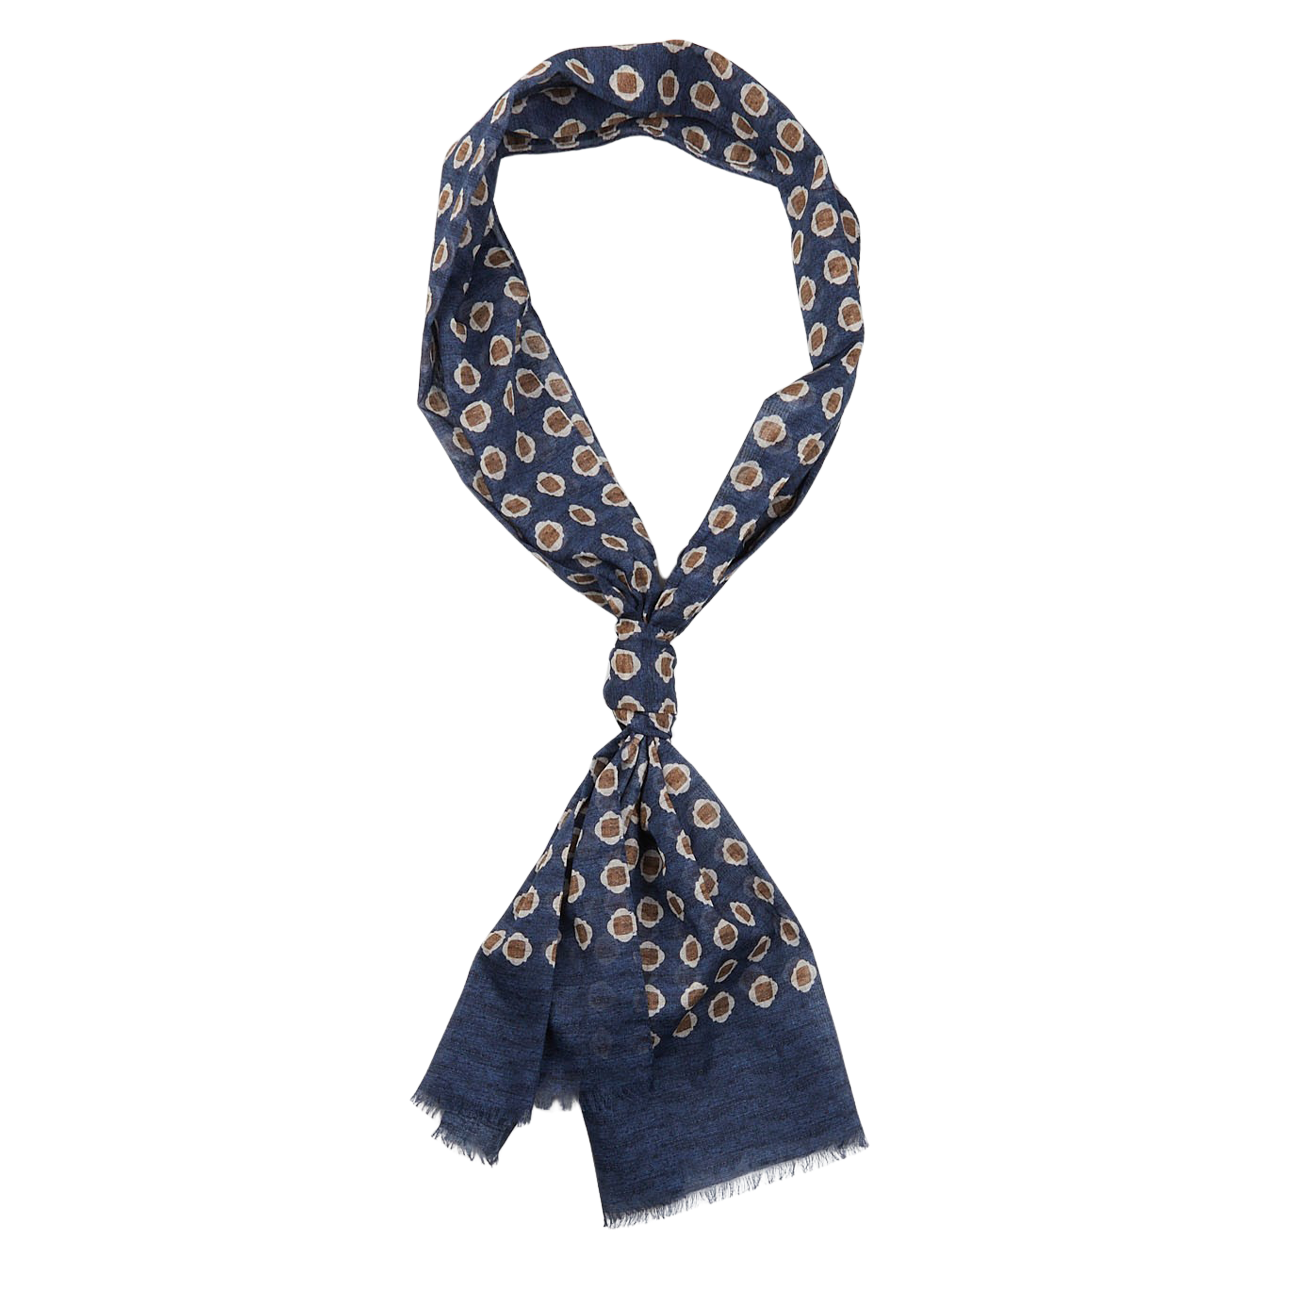 Dark Blue Geometrical Printed Cotton Scarf by Amanda Christensen with an abstract dot pattern, made in Italy, casually tied on a white background.